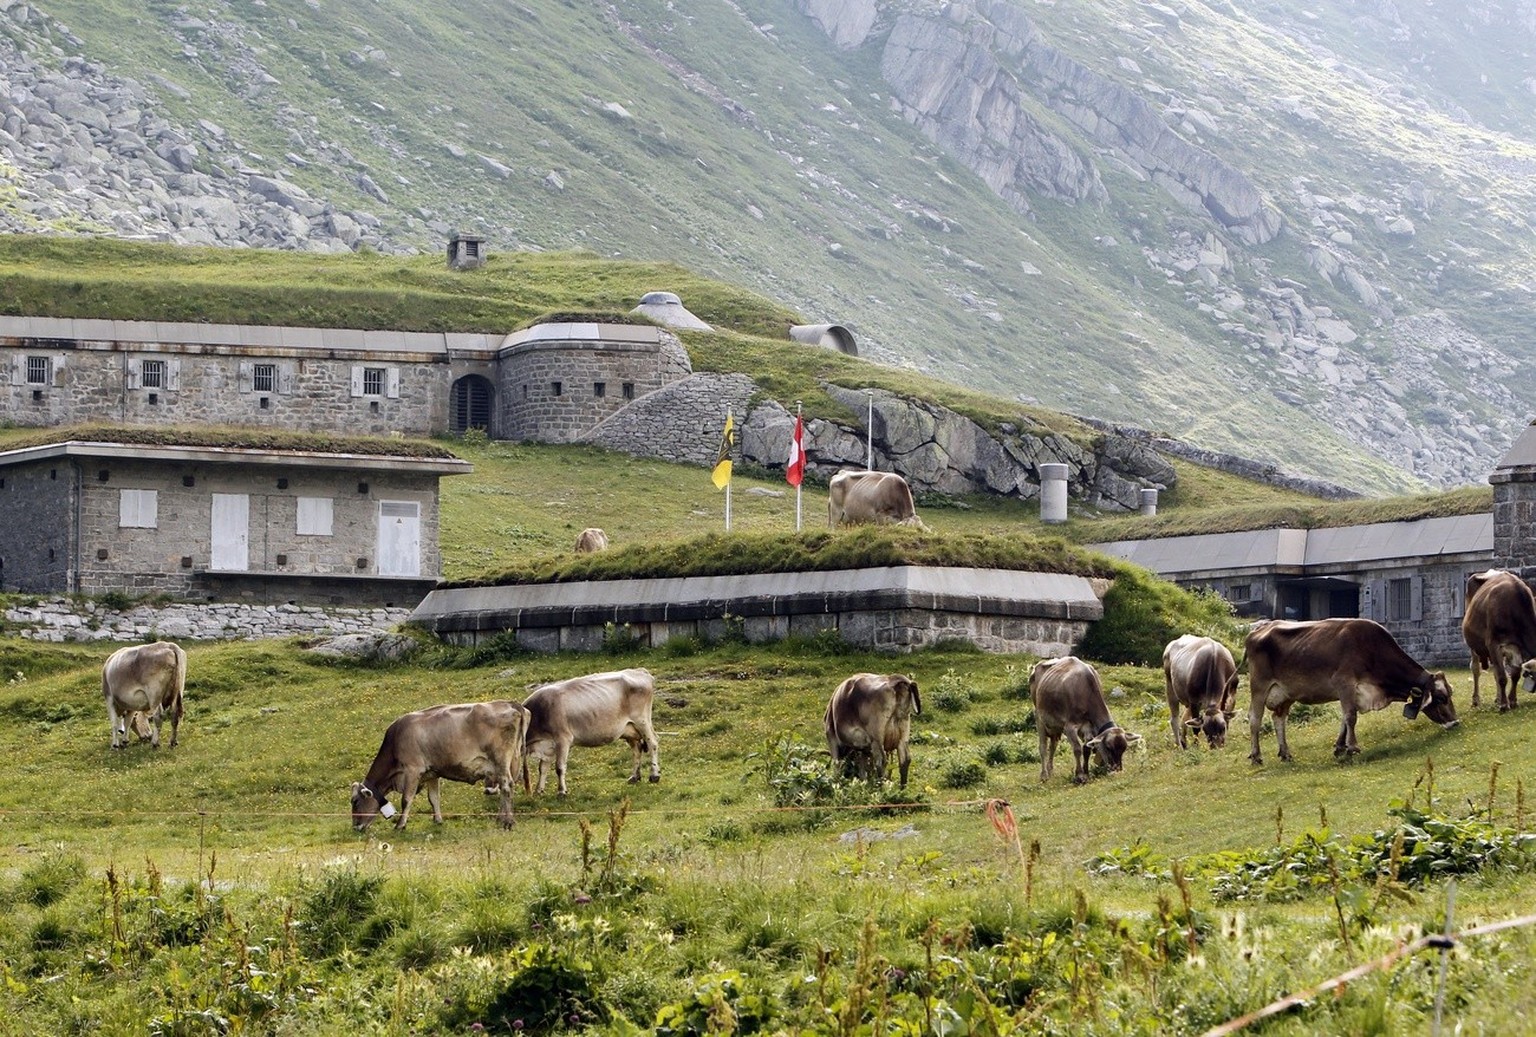 Cows graze next to a former army bunker, the present-day museum at the &quot;Ospizio San Gottardo&quot; hospice on the Gotthard Pass, which connects the canton of Ticino with the canton of Uri, Switze ...